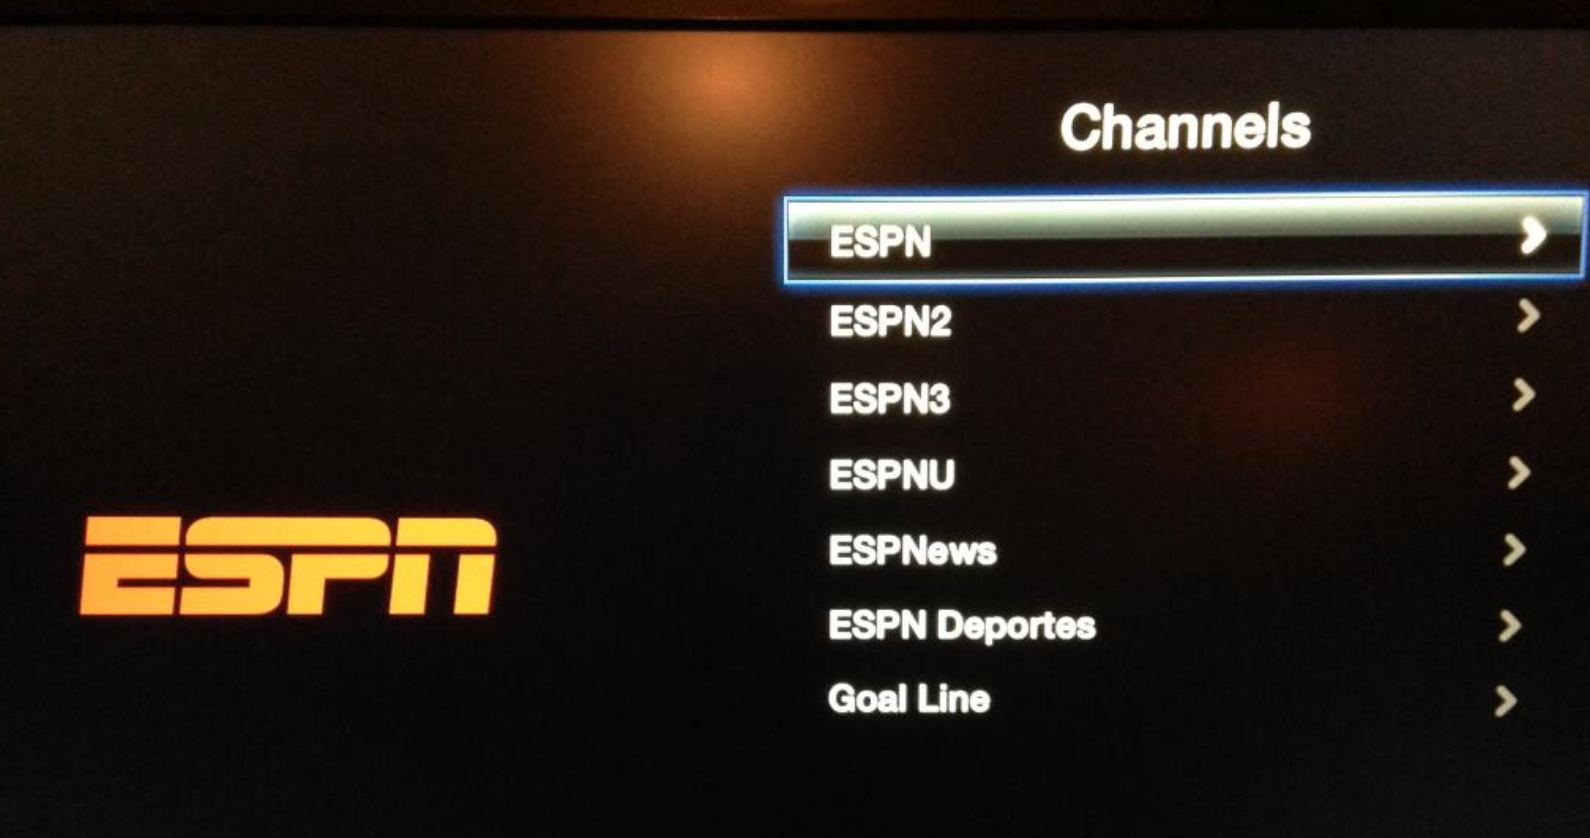 ESPNNews and ESPN Deportes added to Apple TV, iOS app